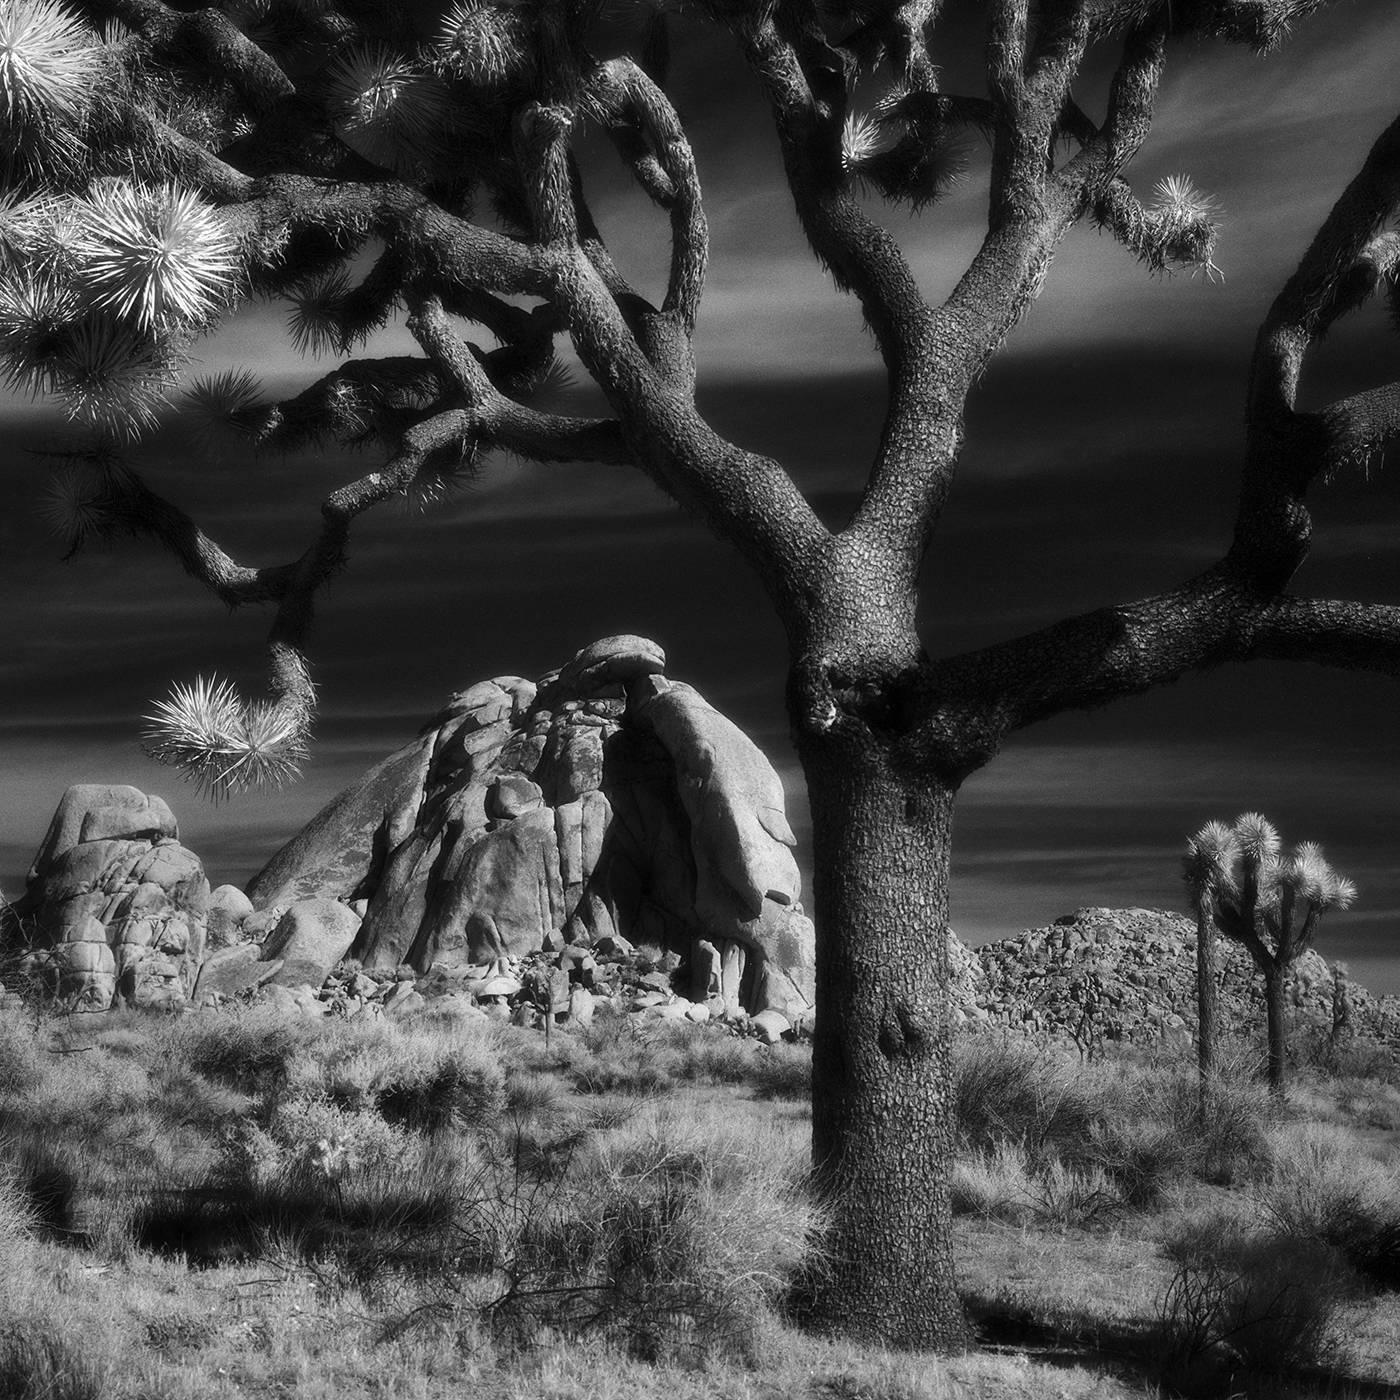 Cody S. Brothers Black and White Photograph - Landscape Photography Square Series: "Joshua Tree Old"